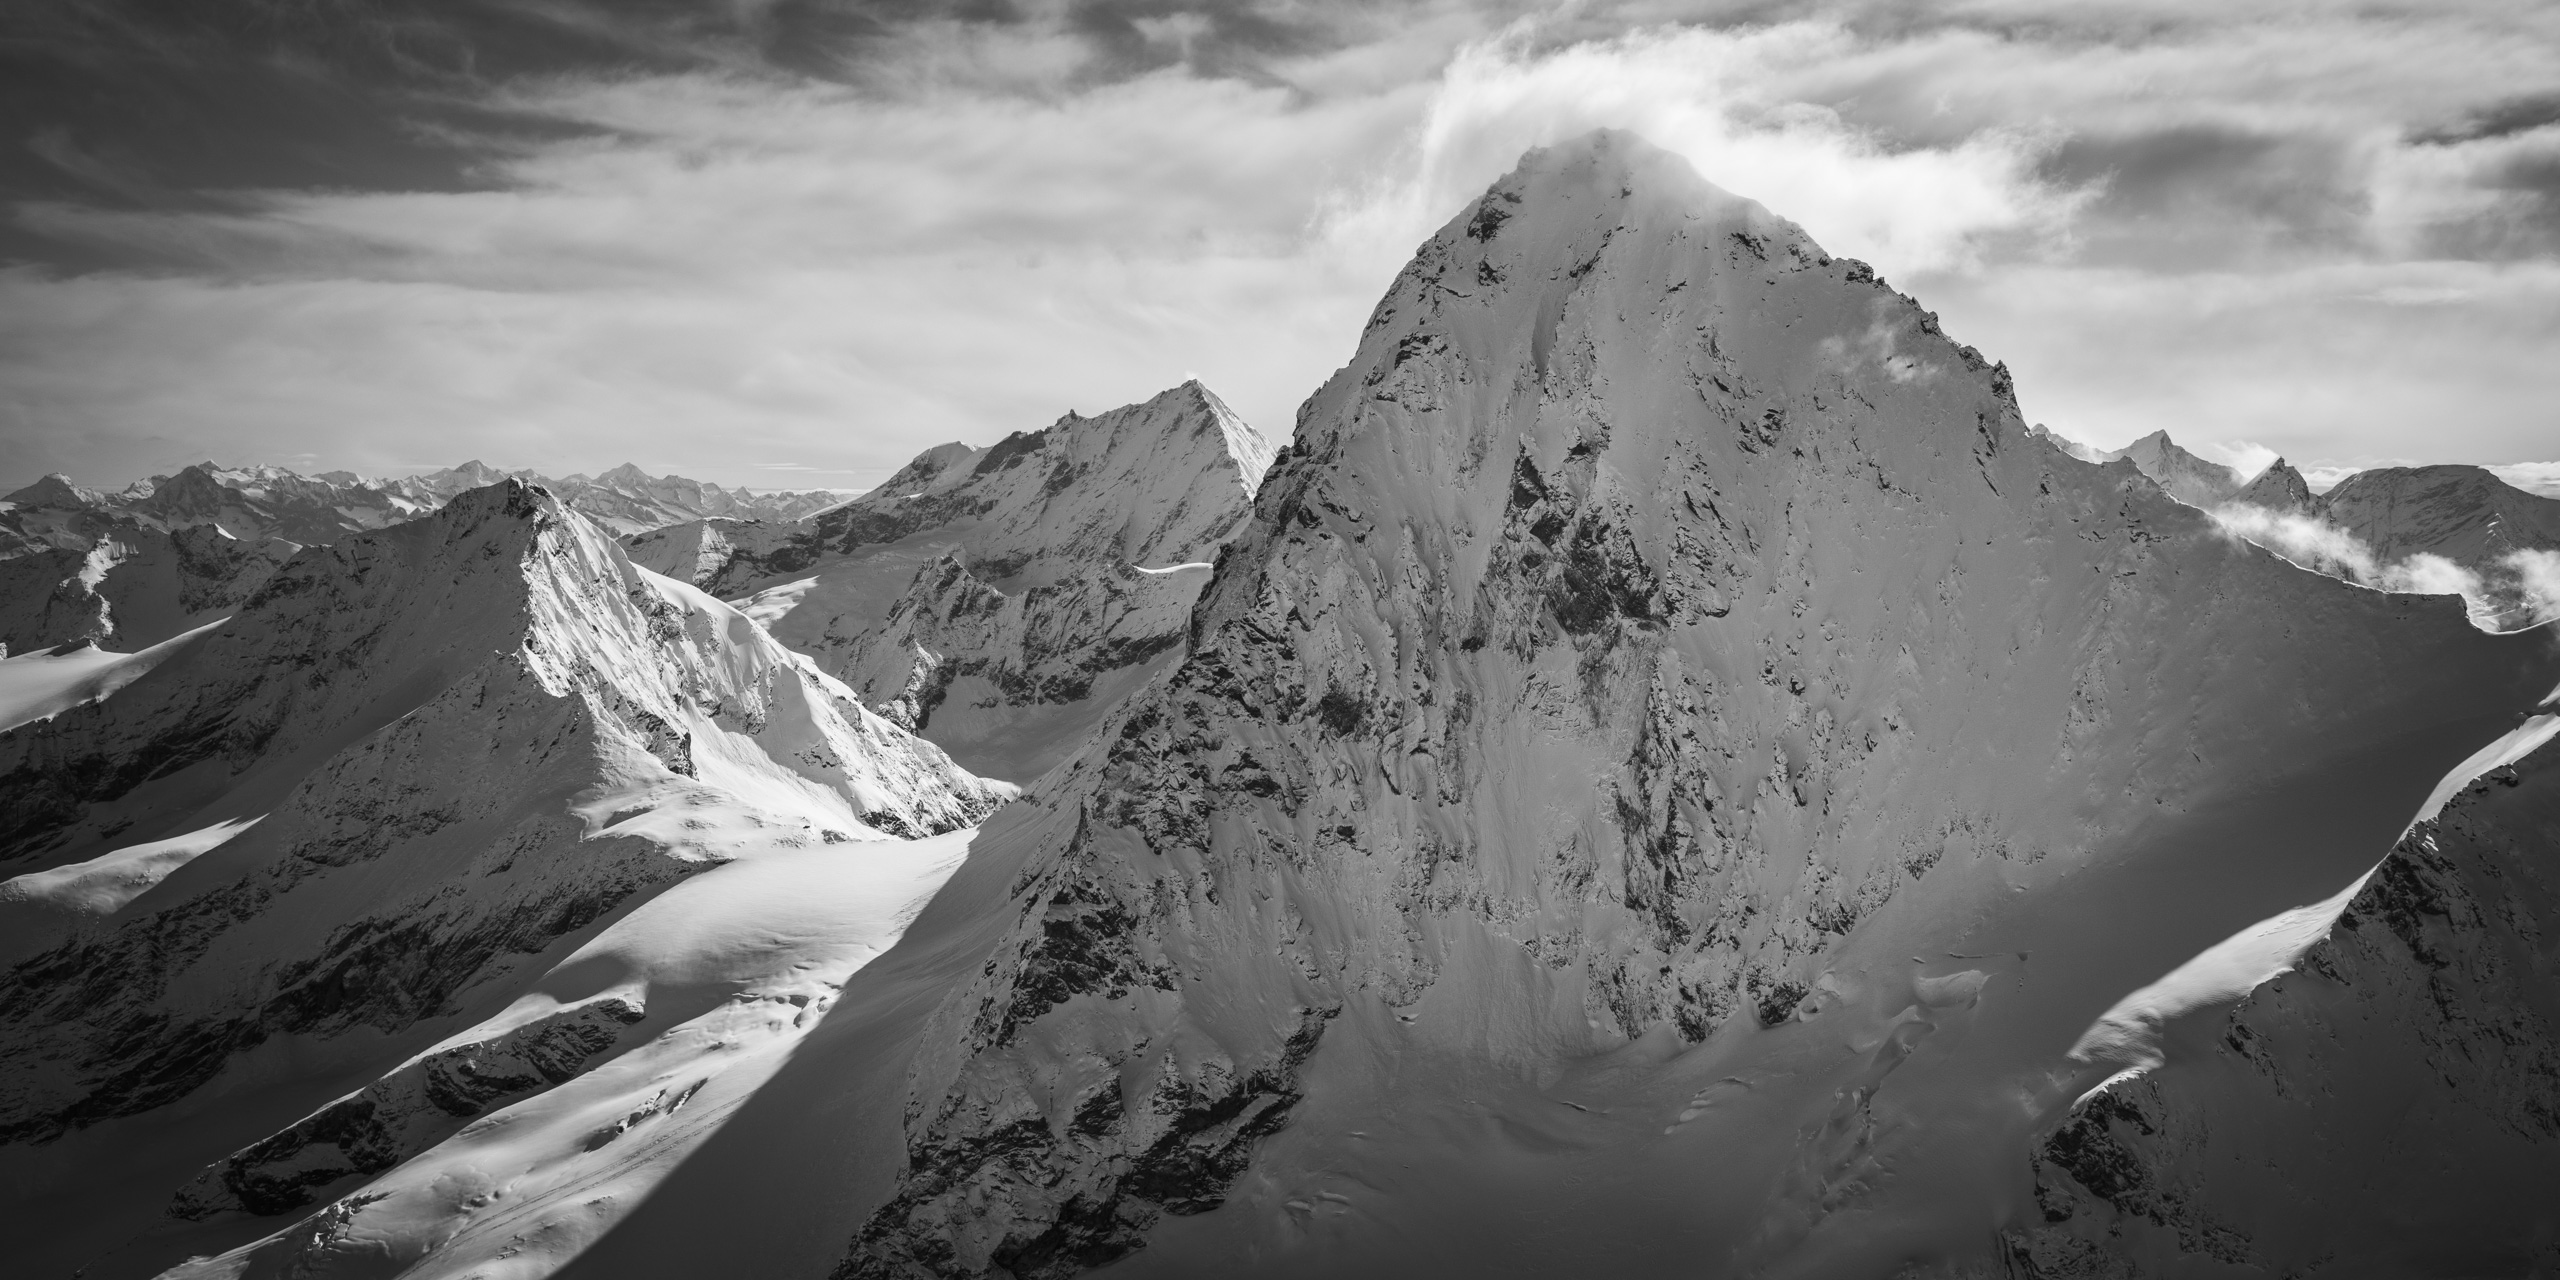 black and white mountain landscape photo - swiss alps val d'hérens - panoramic alps photo